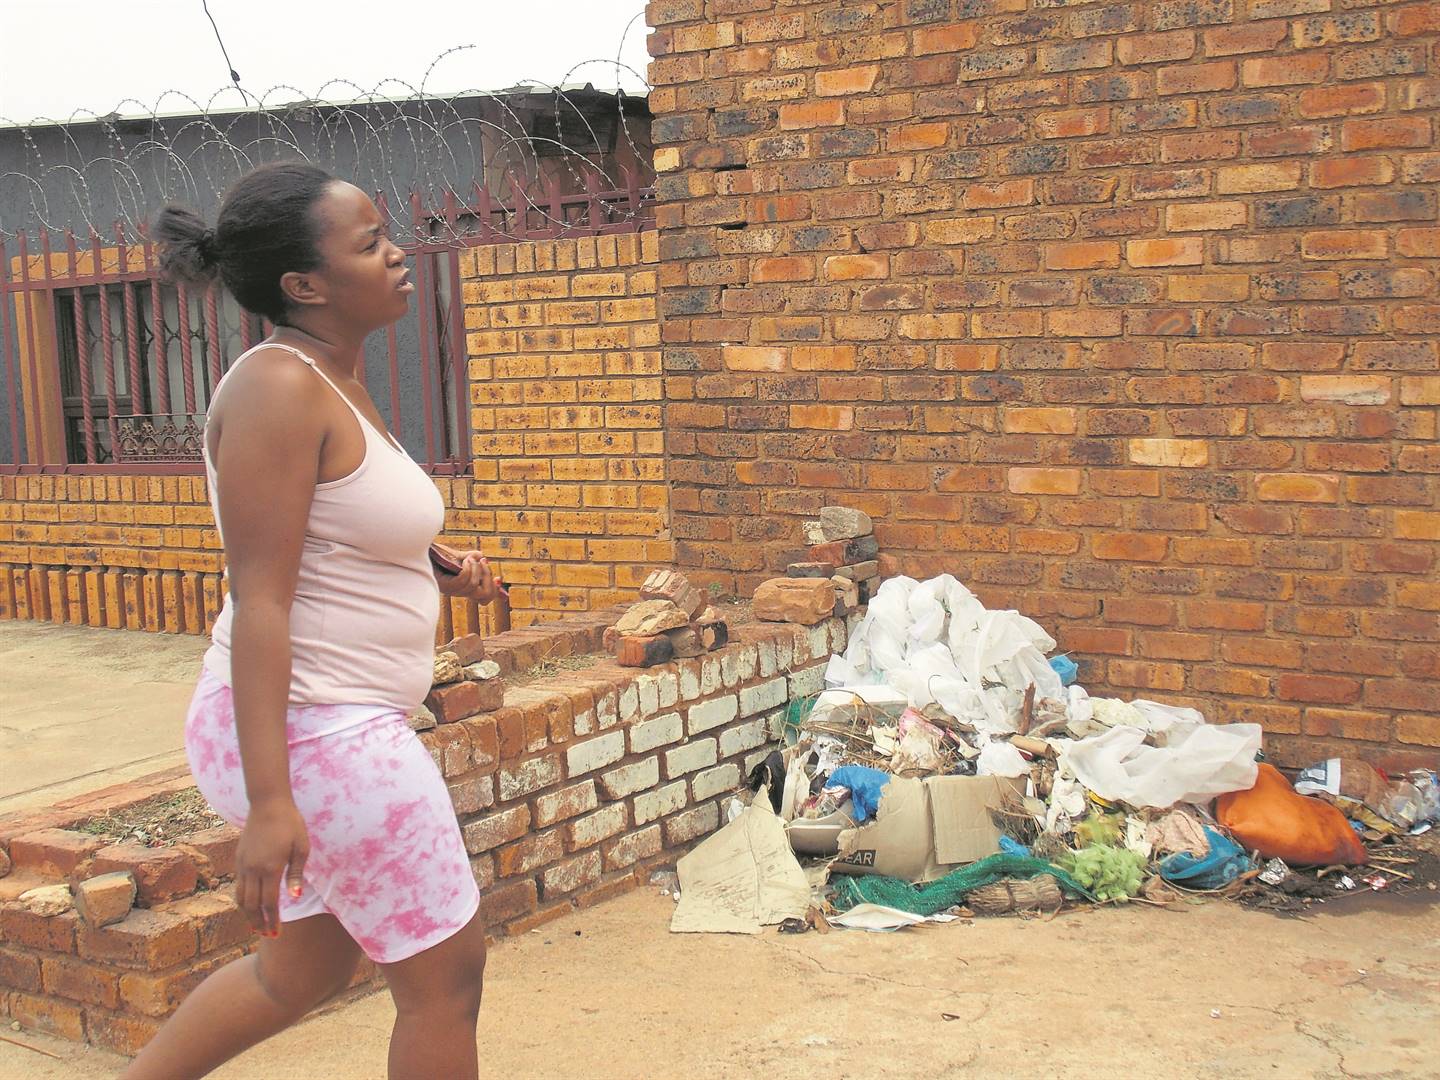 Mmapaseka Makgalwa said last week the workers were cleaning the mortuary and left their rubbish outside the mortuary. The rubbish found its way into their yards in Atteridgeville.        Photo by Aaron Dube